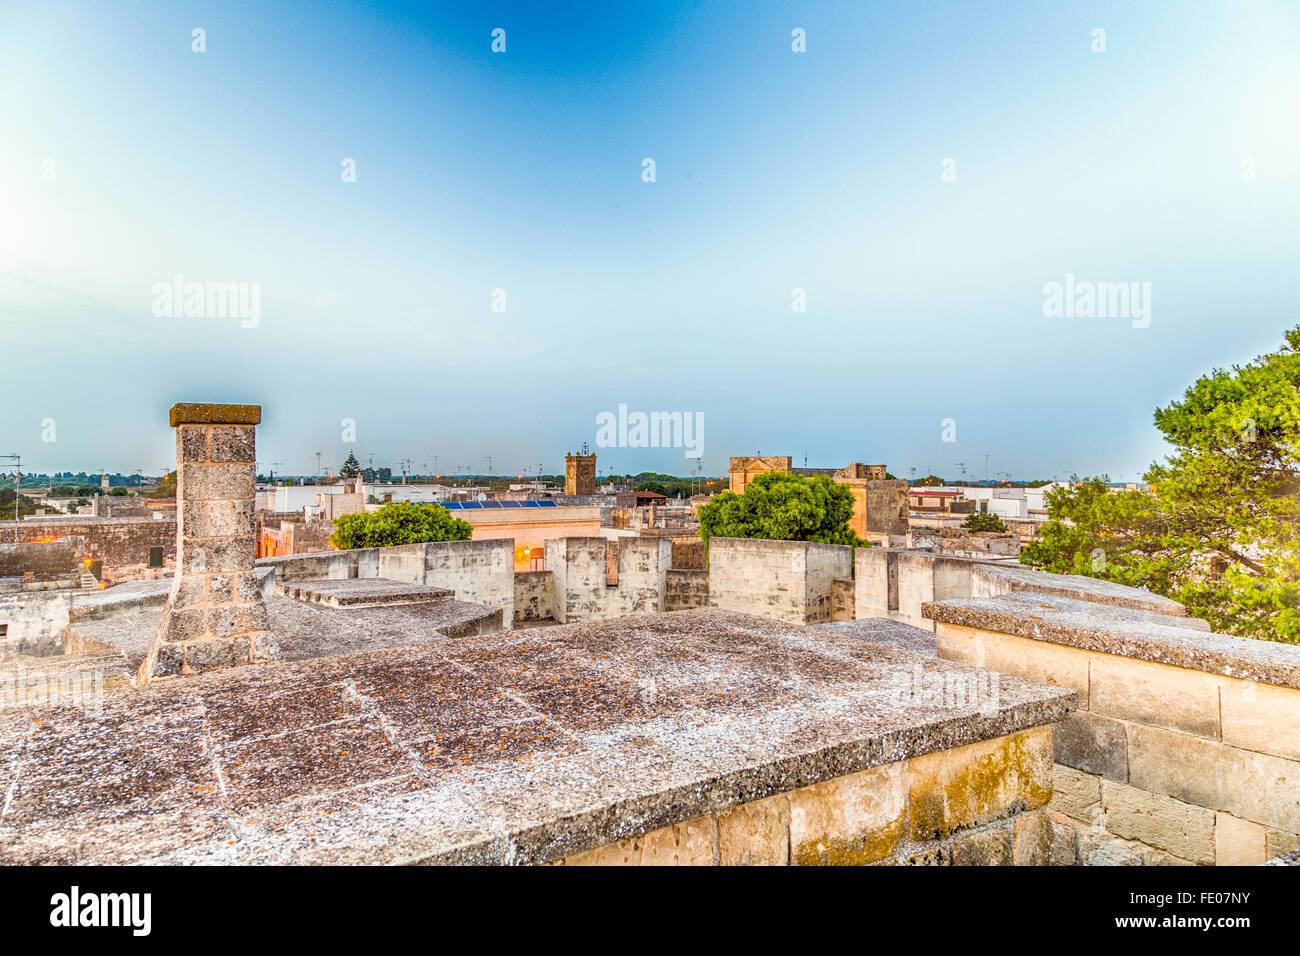 the grid of streets and walls of fortified citadel of XVI century in Italy Stock Photo